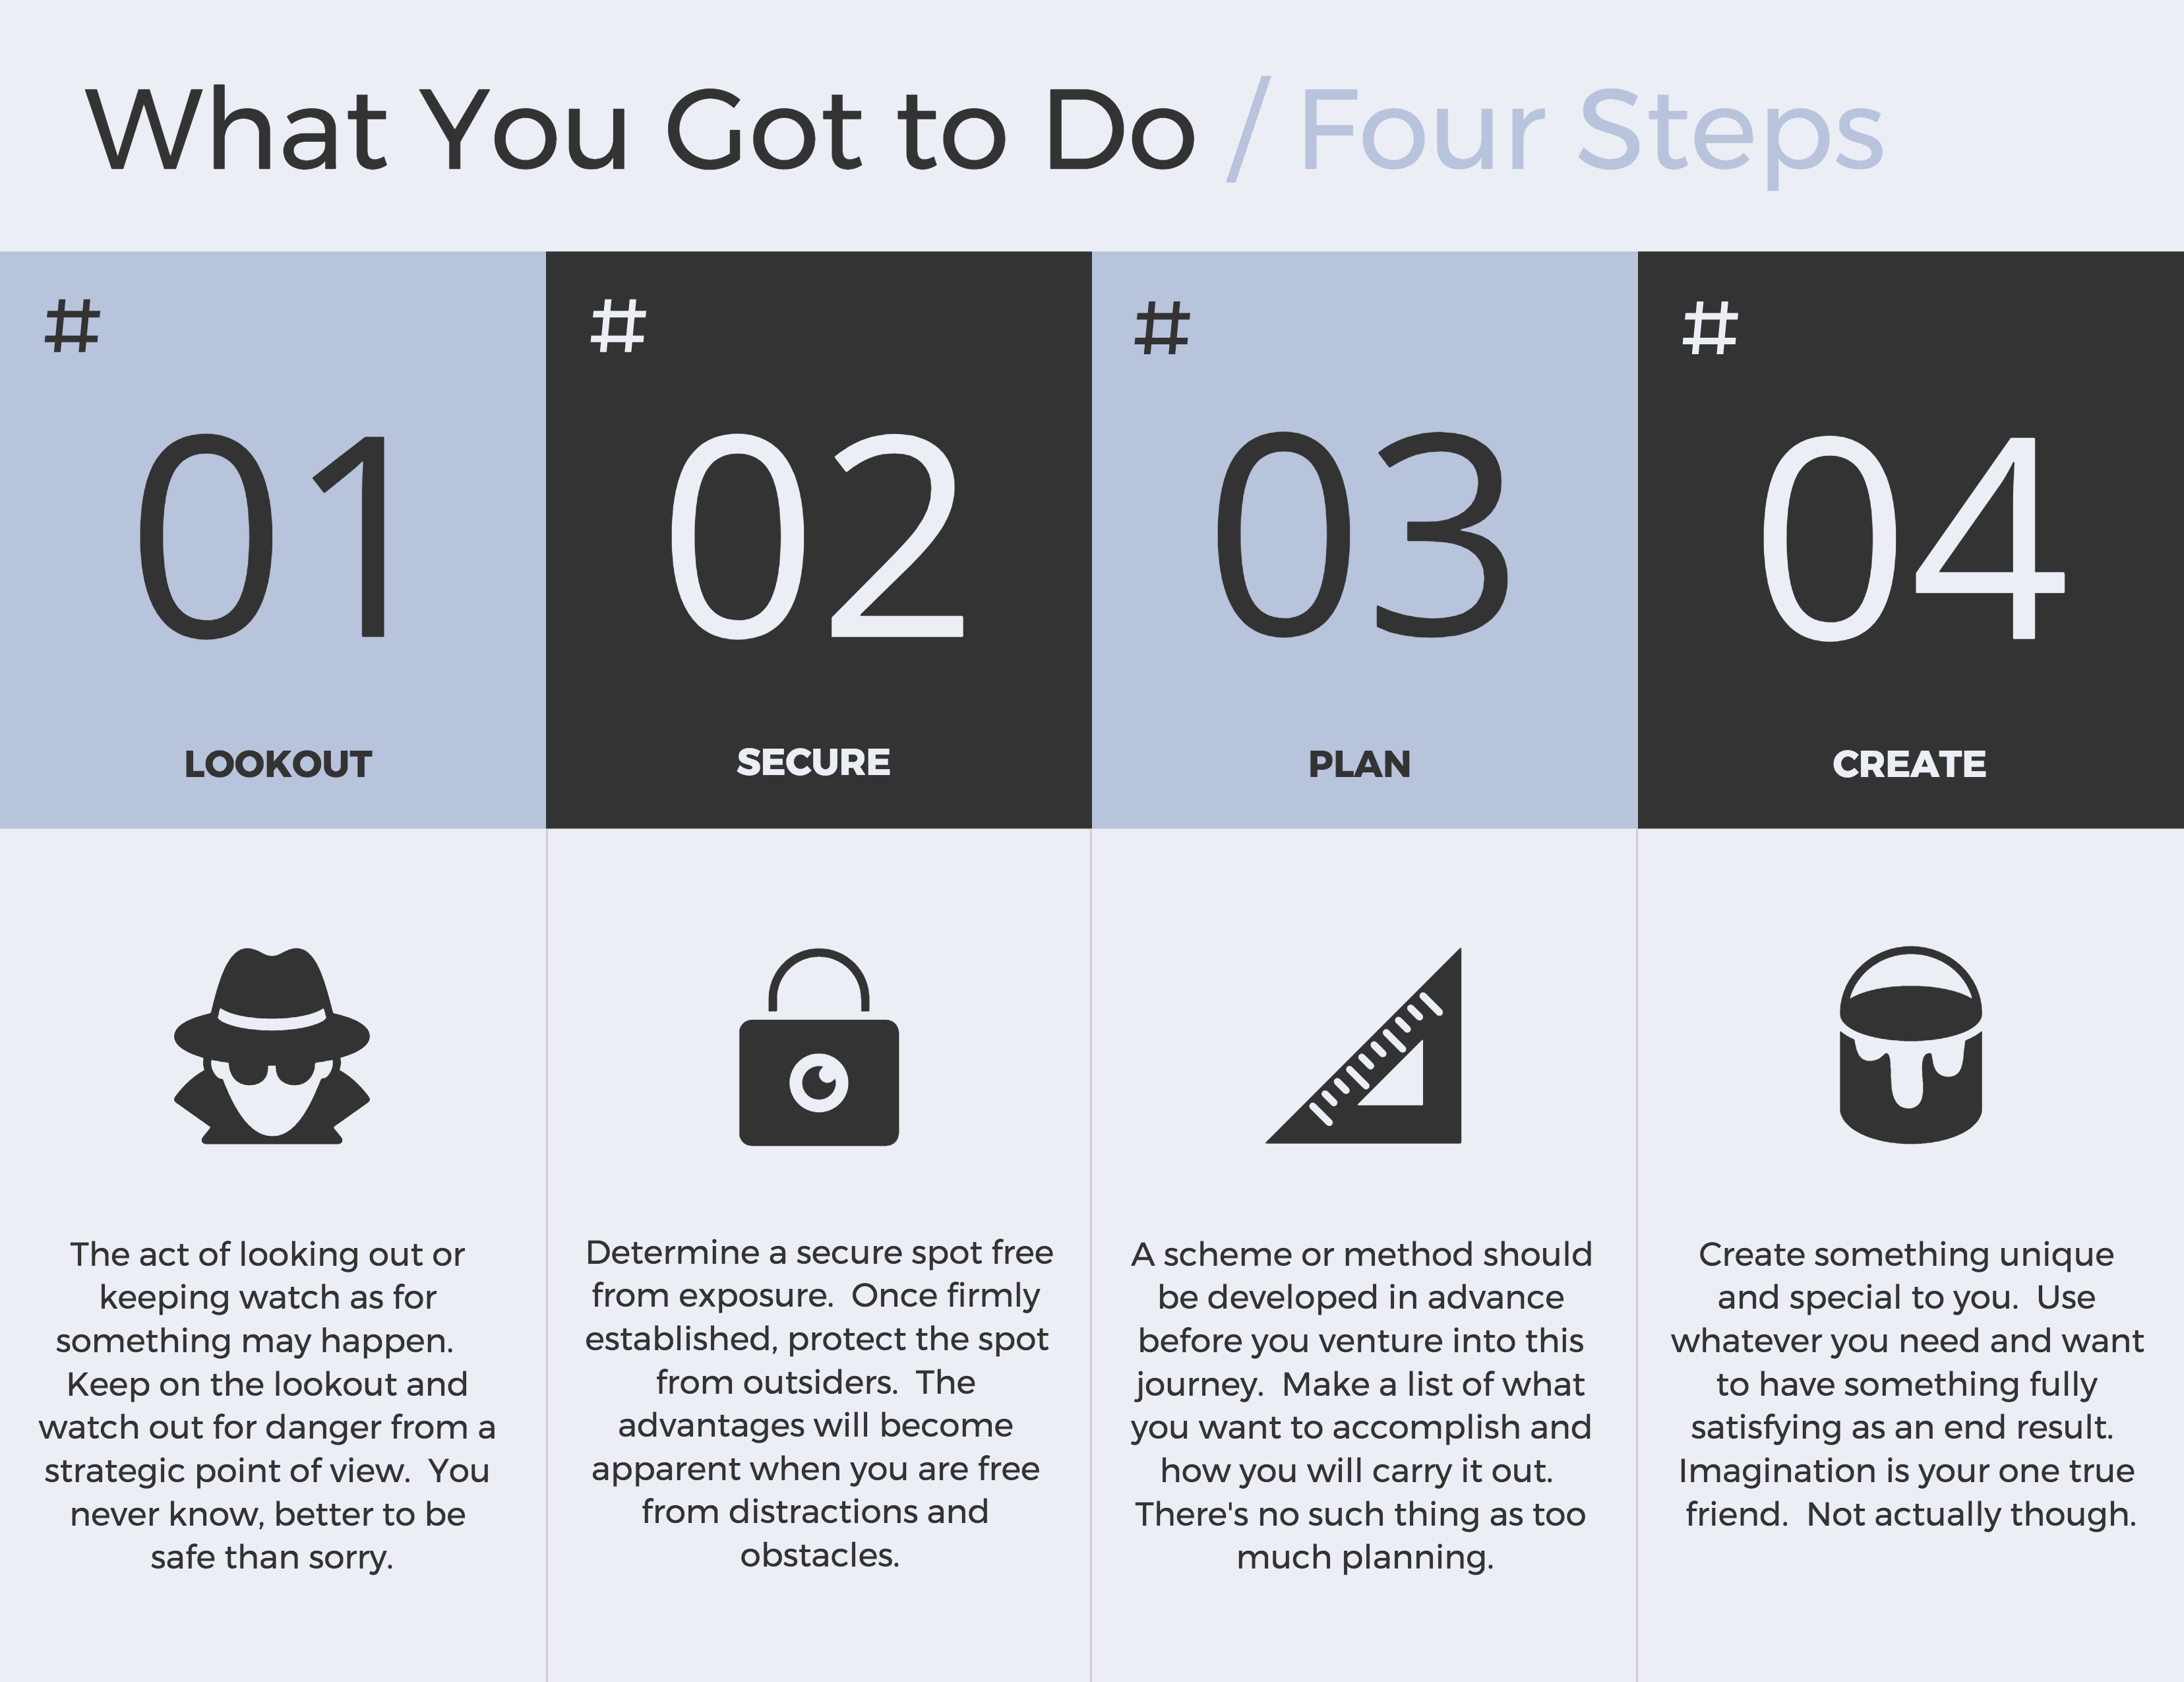 28 Process Infographic Templates and Visualization Tips - Venngage